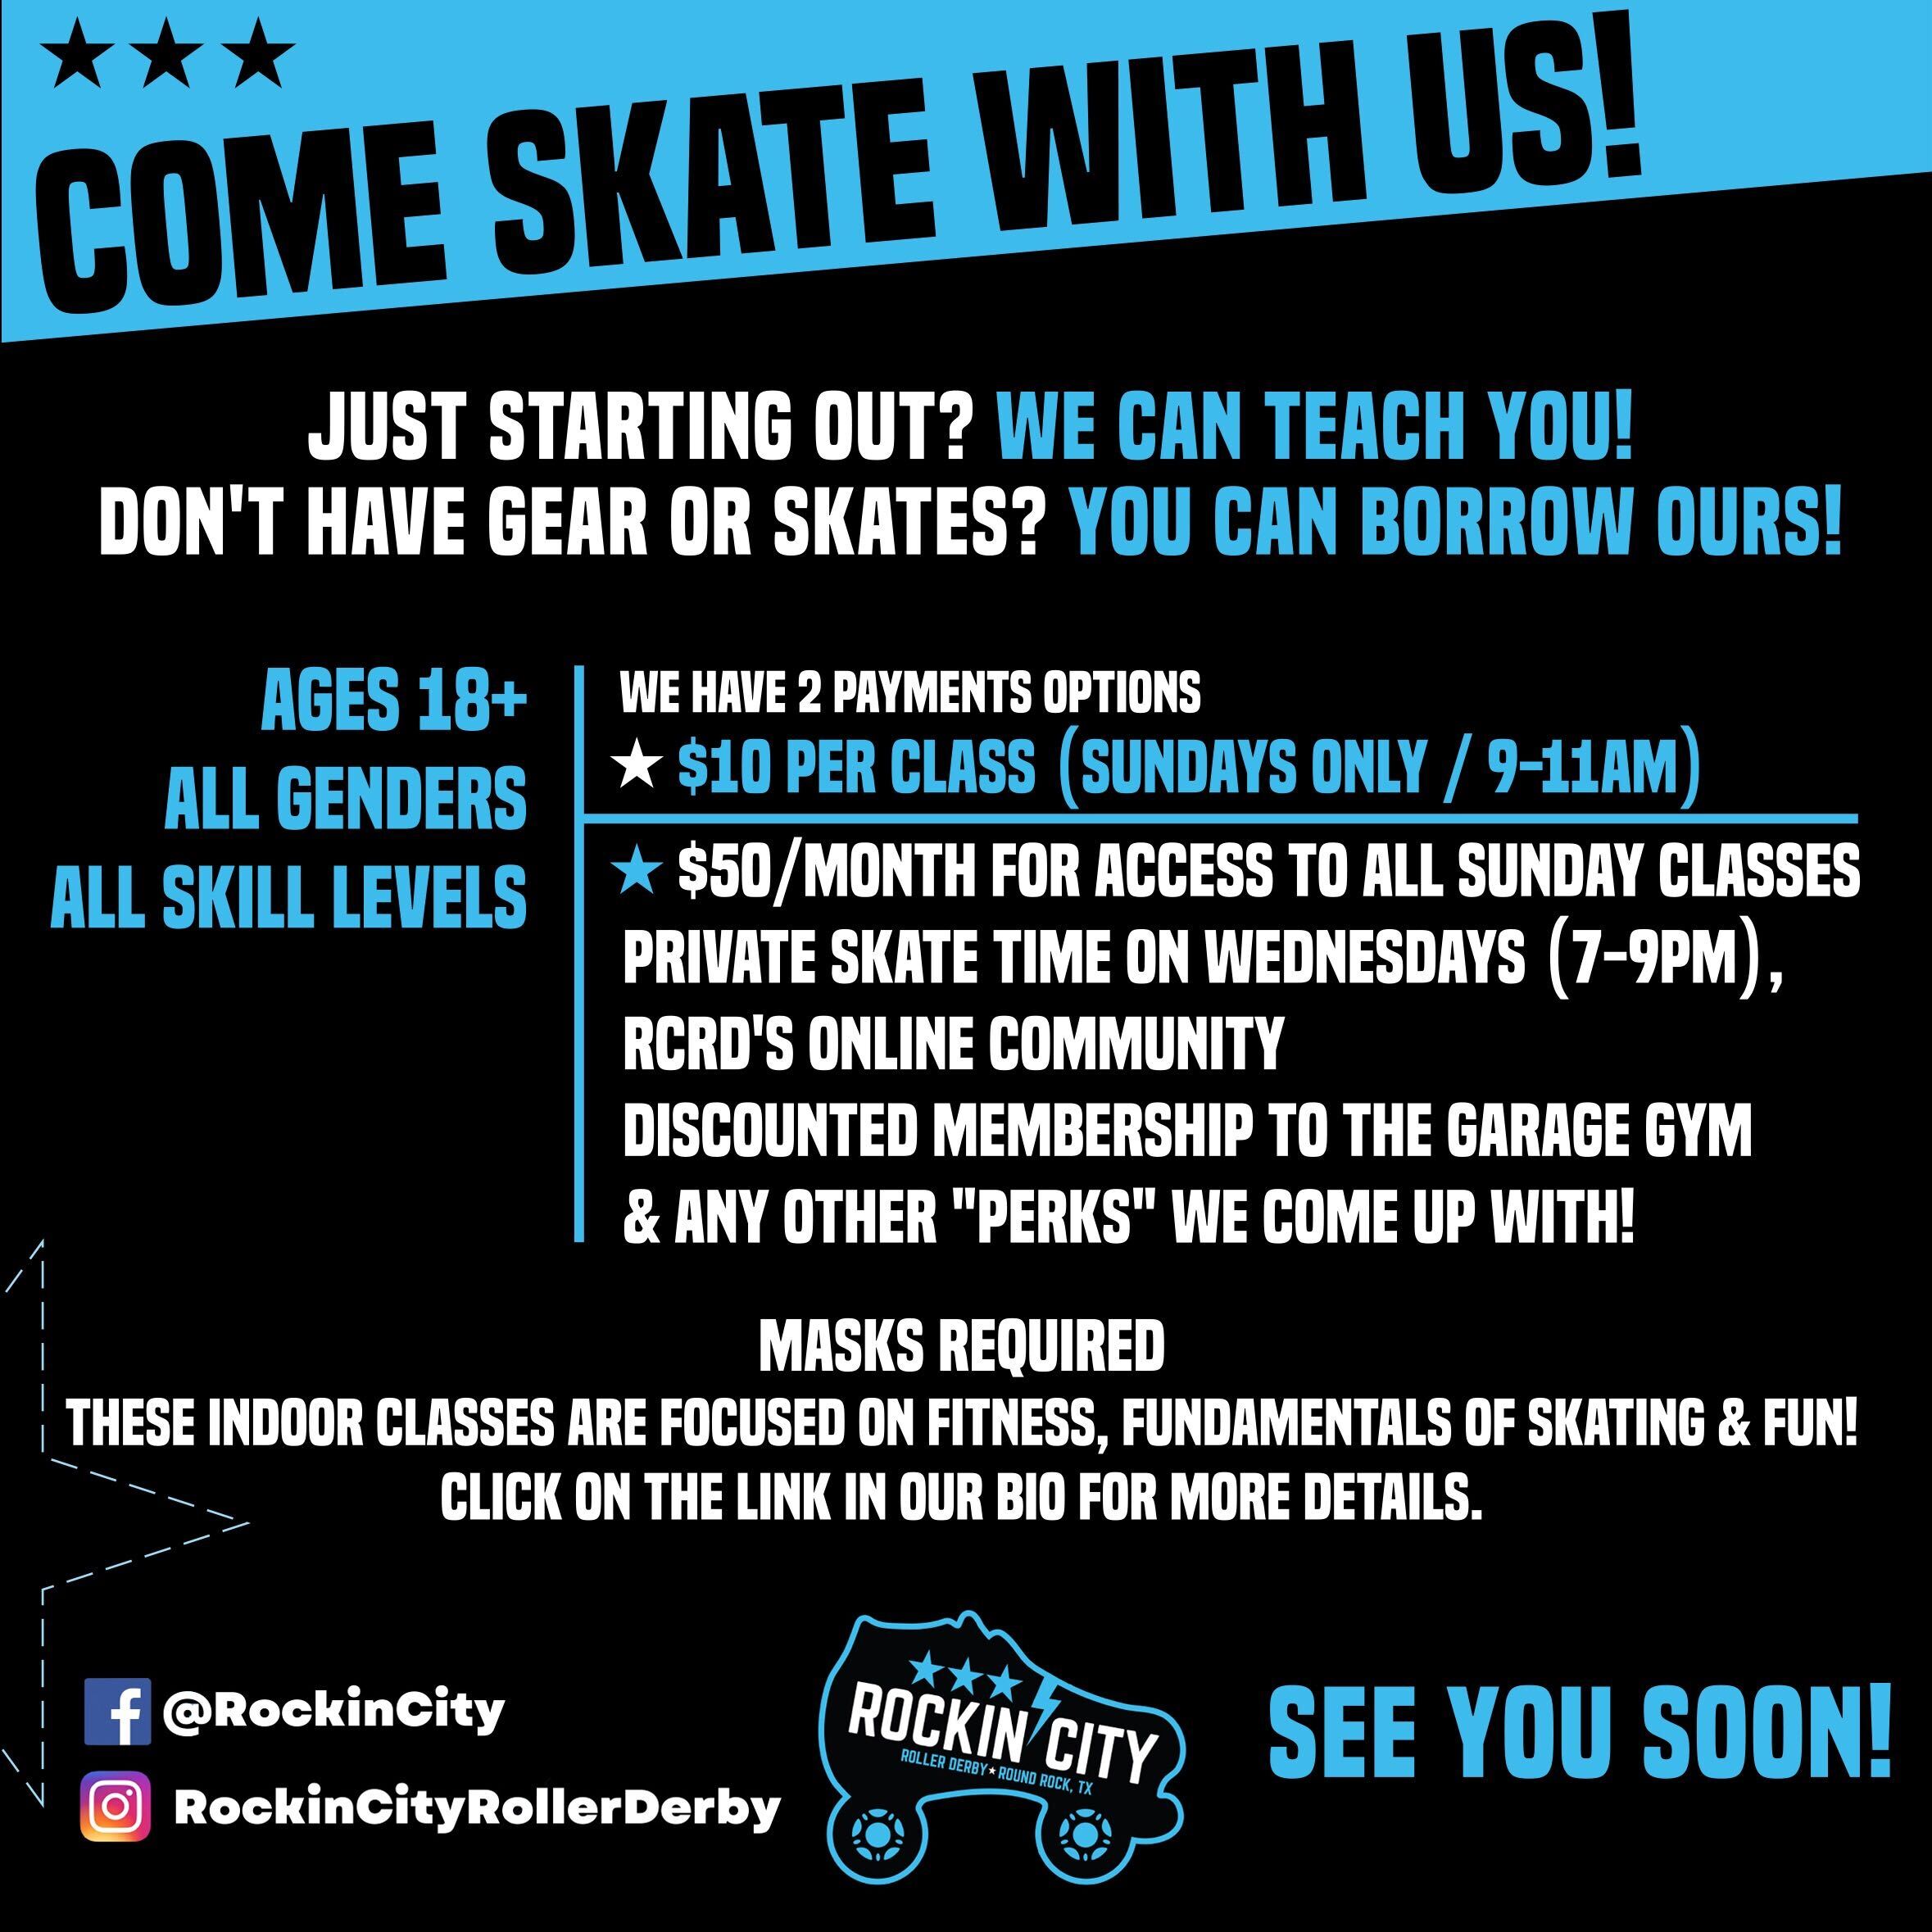 Just starting out? We can teach you! Don't have gear or skates? You can borrow ours! Ages 18+, all genders, all skill levels. We have 2 payment options - $10 per class (Sundays only, 9-11am) or $50/month for access to all Sunday classes, private skate time on Wednesdays 7-9pm, RCRD's online community, discounted membership to the garage gym & any other "perks" we come up with! Masks required. These indoor classes are focused on fitness, fundamentals of skating & fun! Click on the link in our bio for more details. See you soon!